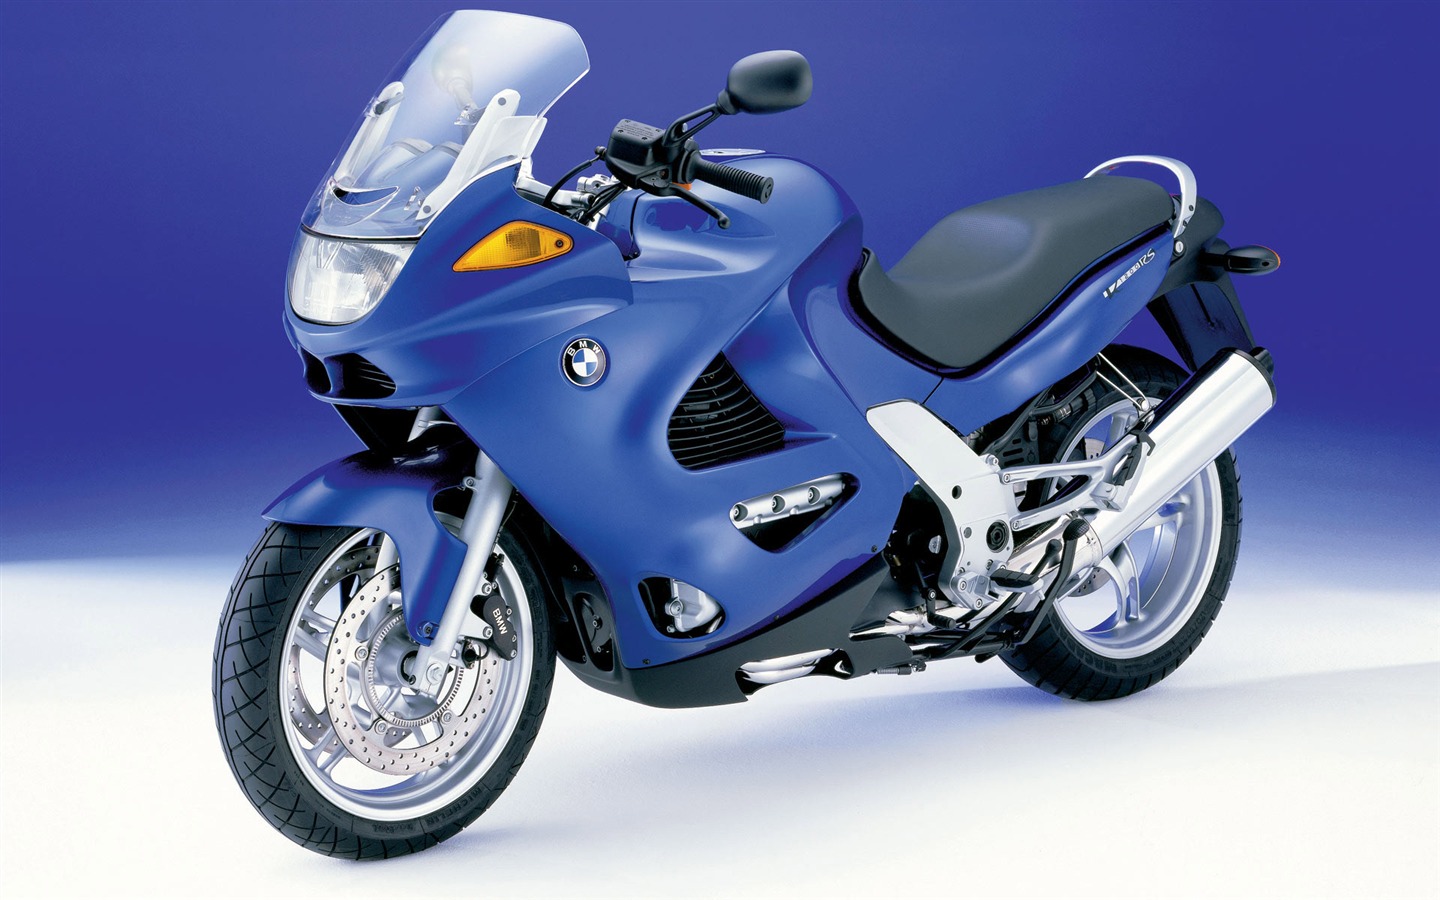 BMW motorcycle wallpapers (1) #2 - 1440x900